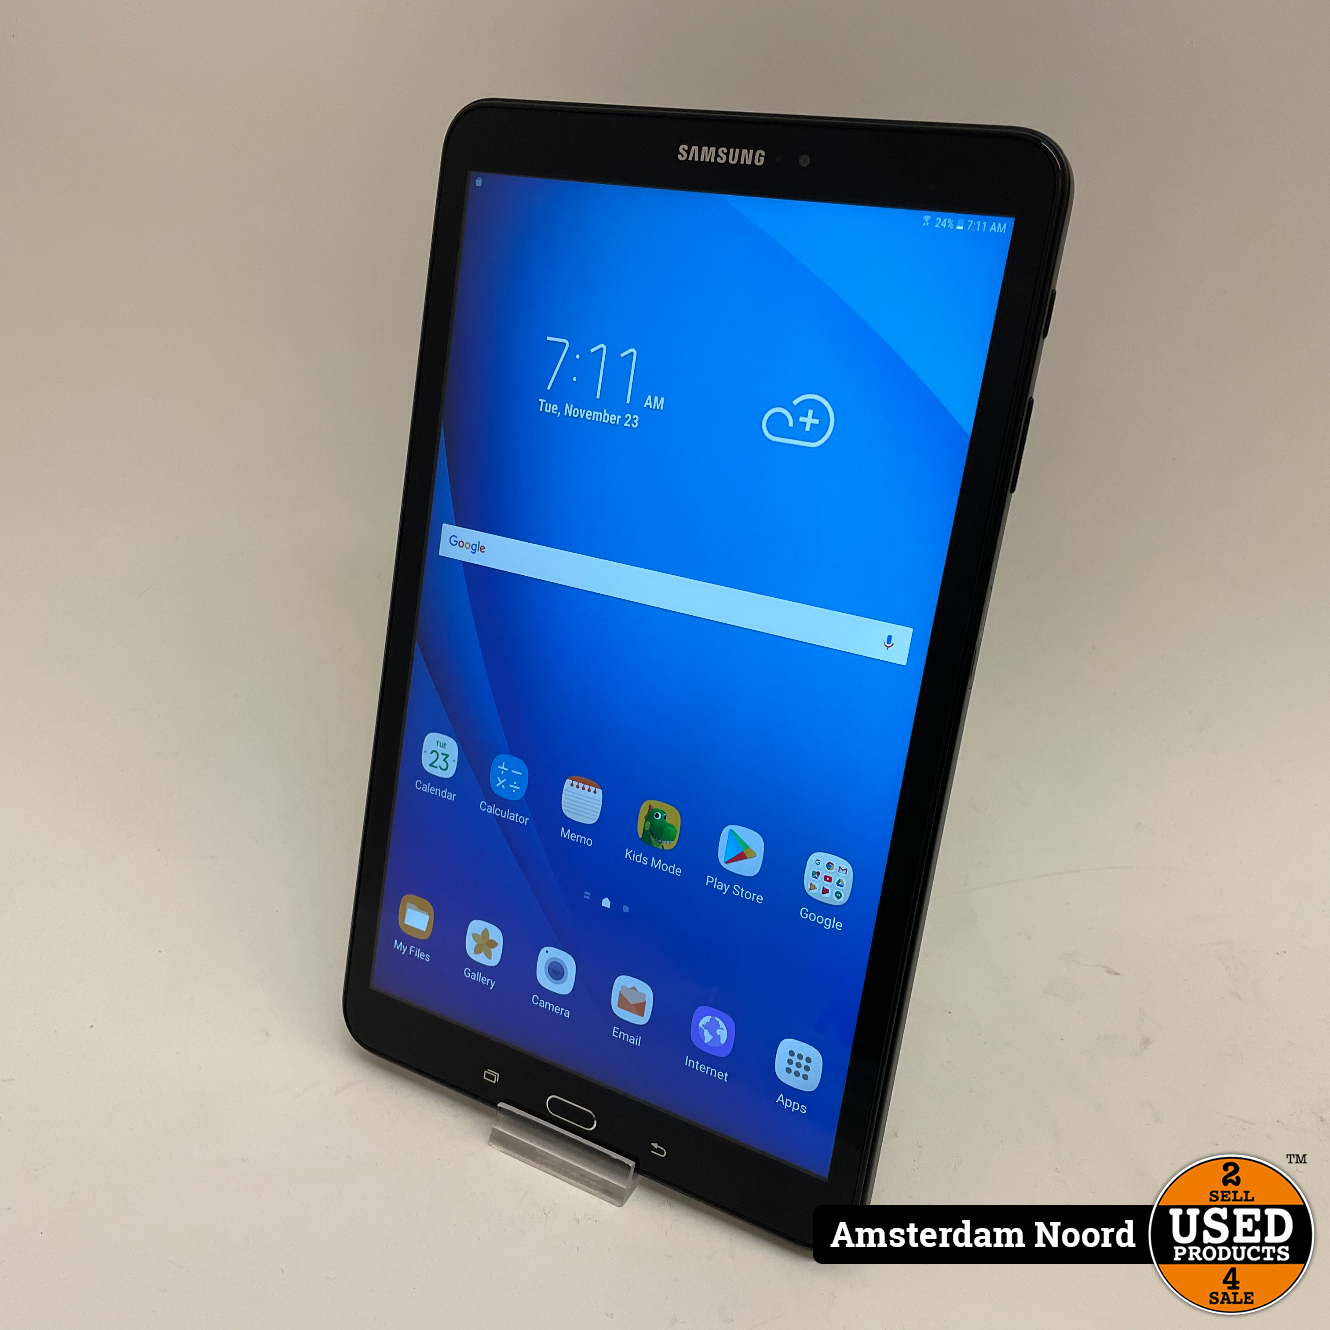 muis Berg schroot Samsung Galaxy Tab A 2016 10.1-inch 16GB Wifi - Used Products Amsterdam  Noord